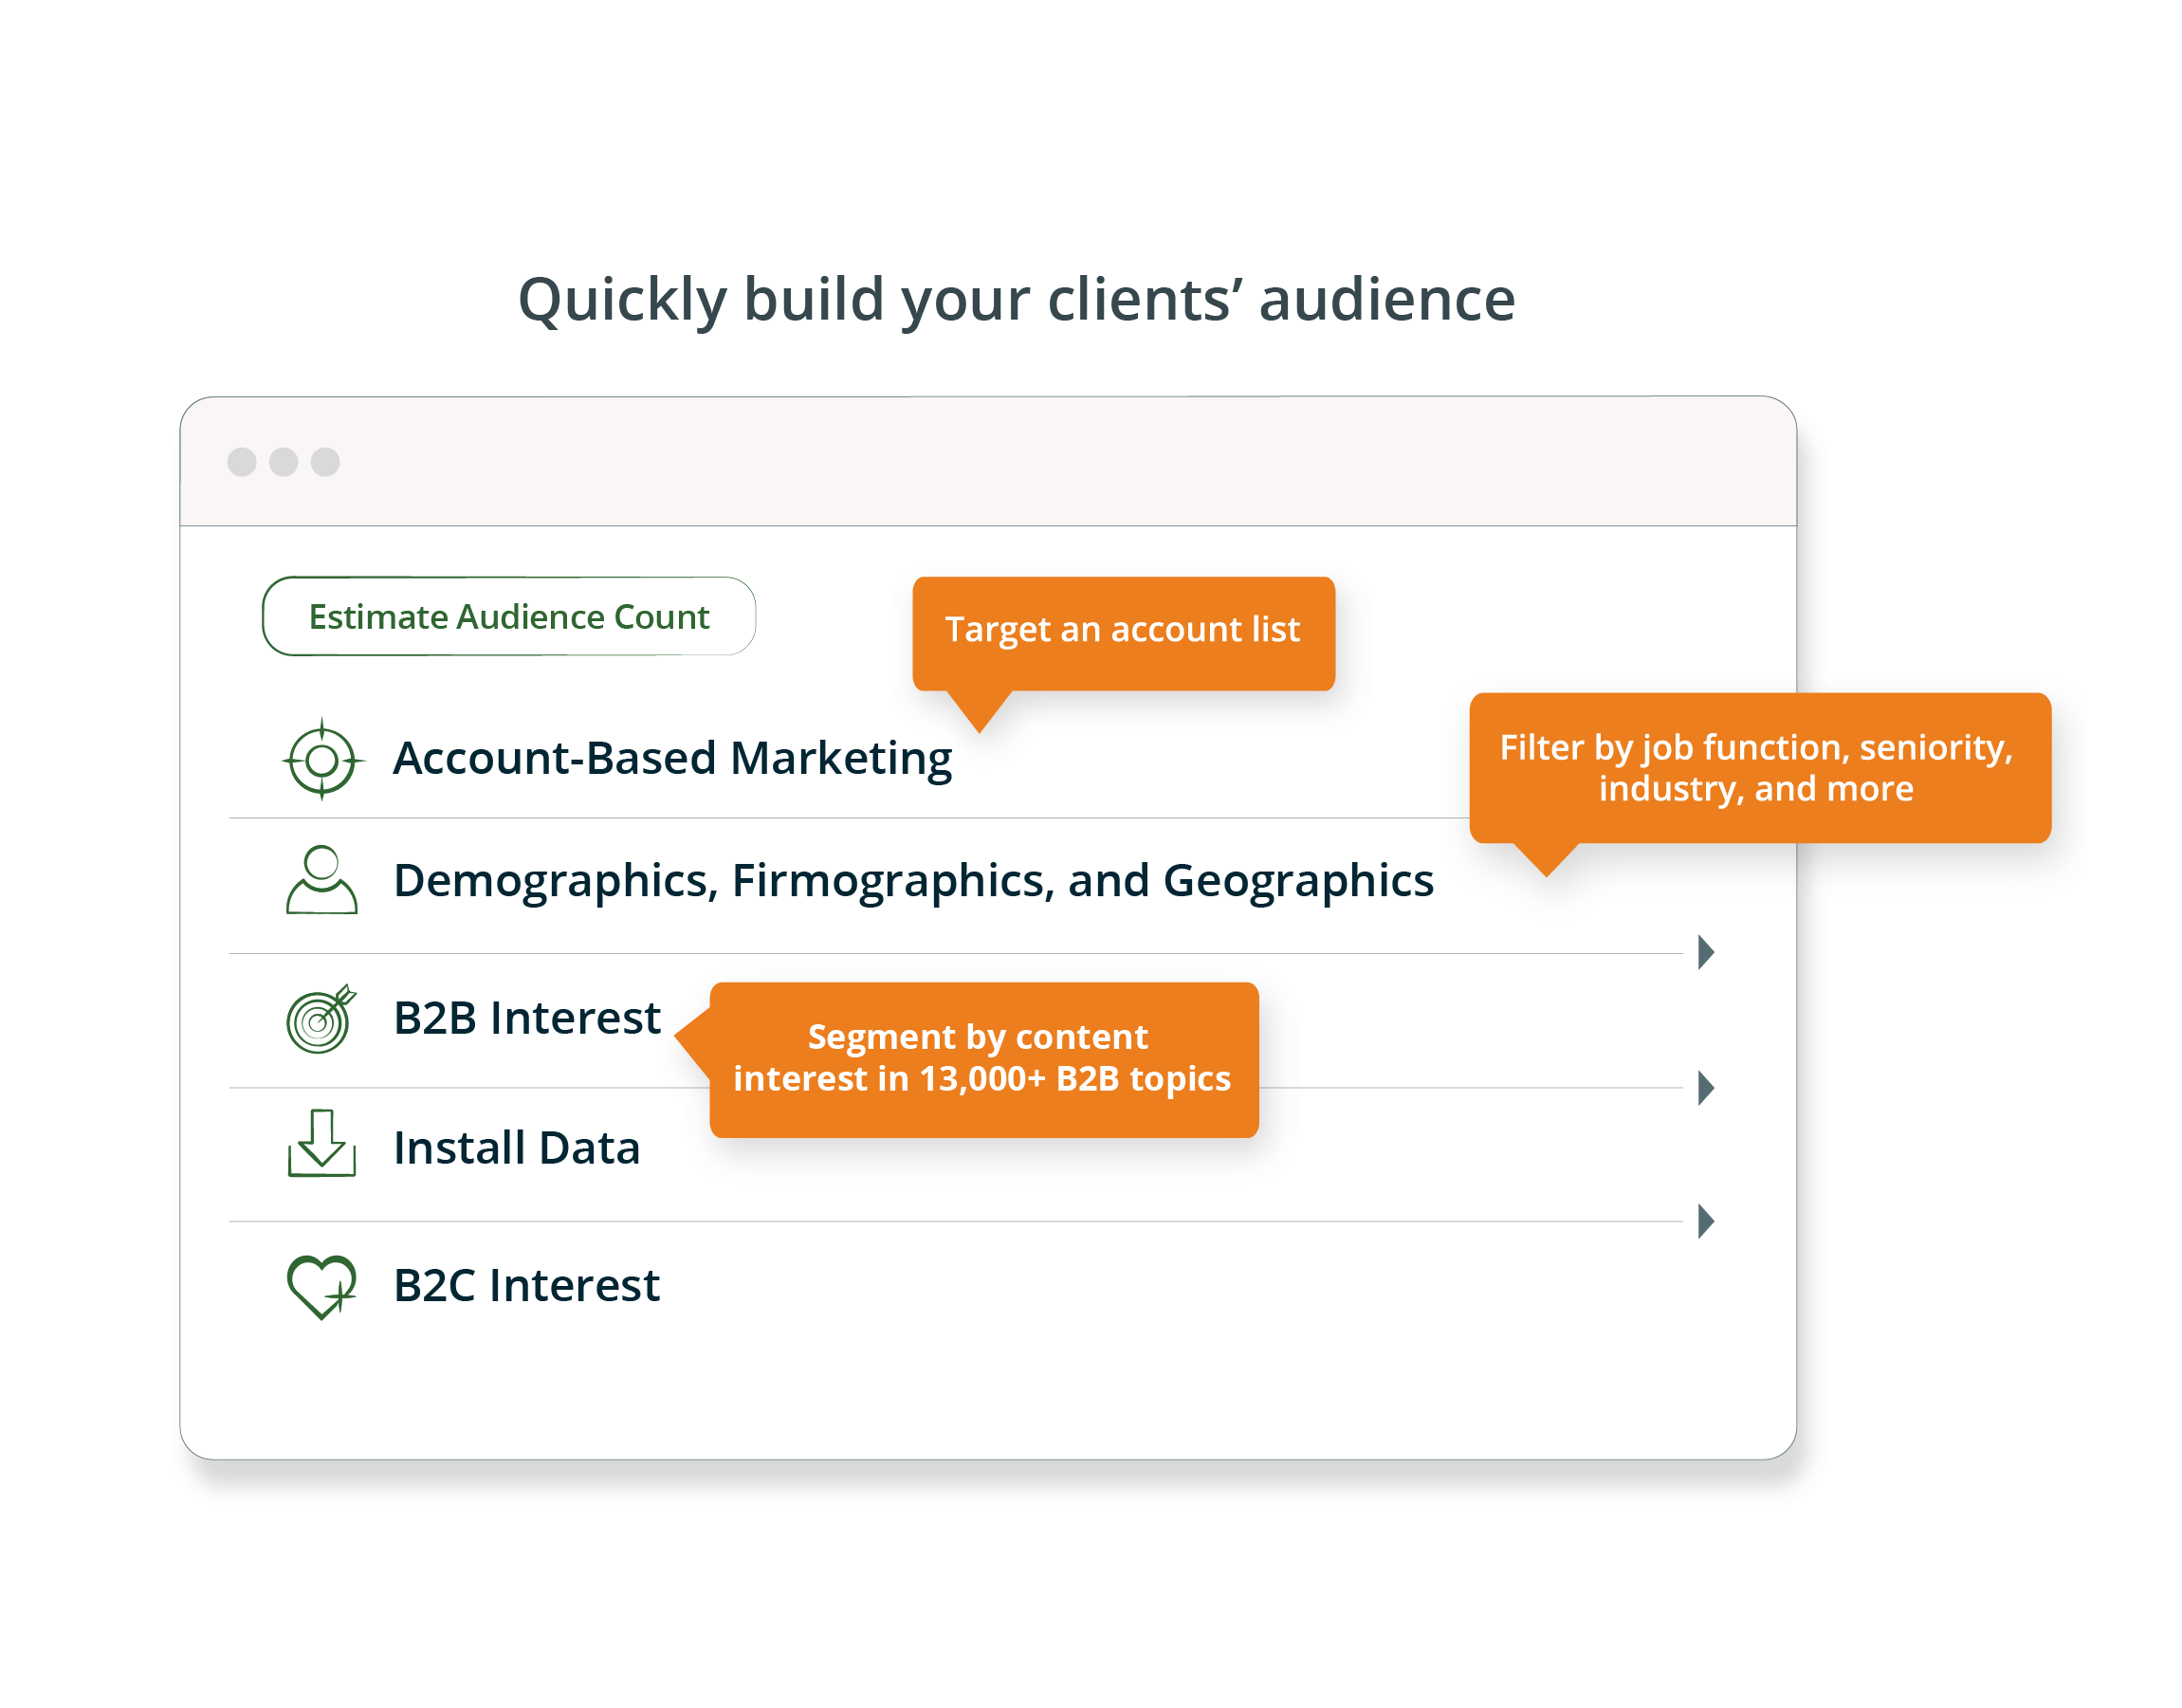 Graphic showing how agencies can use Bombora's data to build client audiences